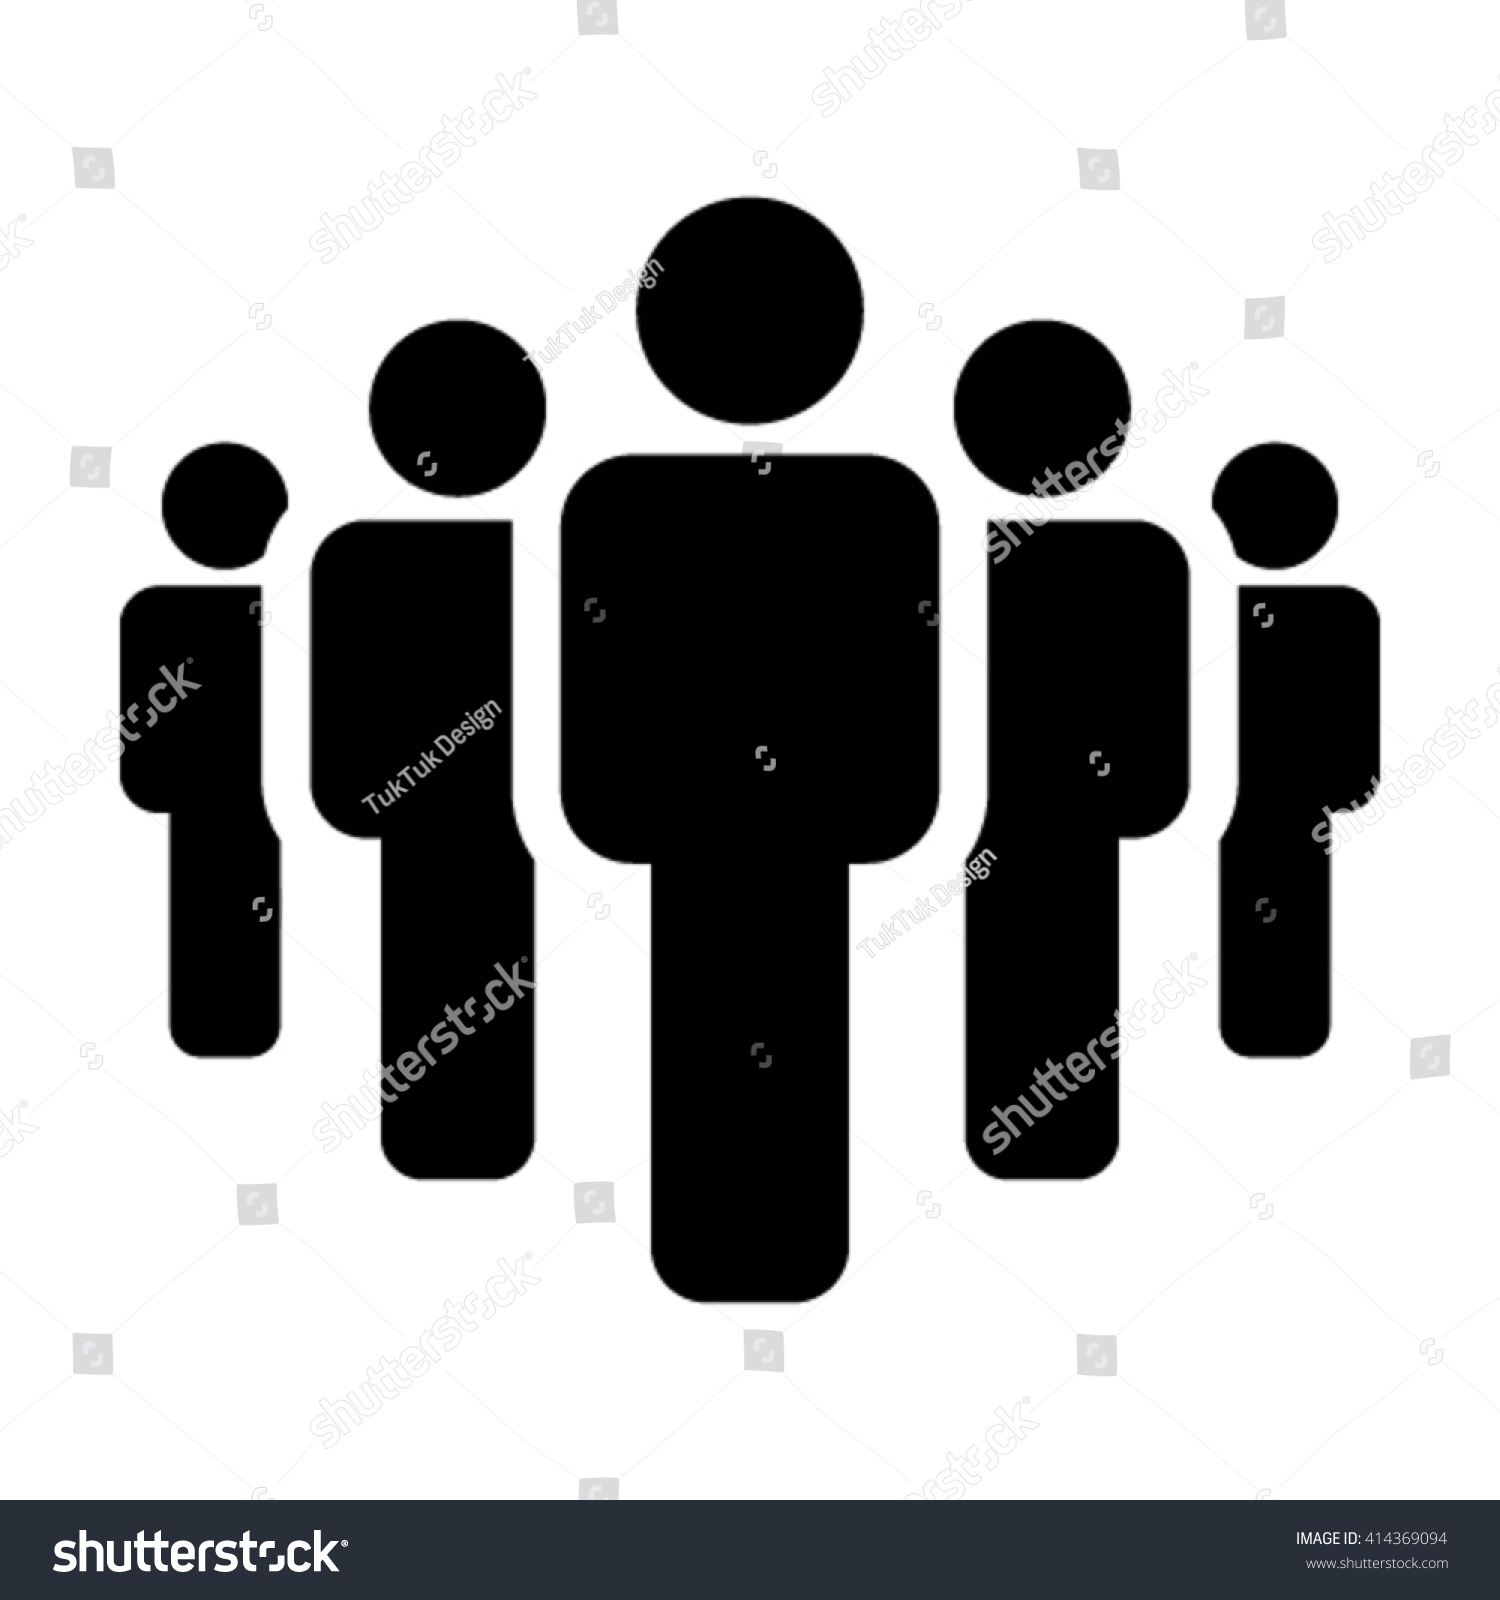 People Icon - Vector Group of Business Person in Glyph Pictogram illustration Symbol #414369094